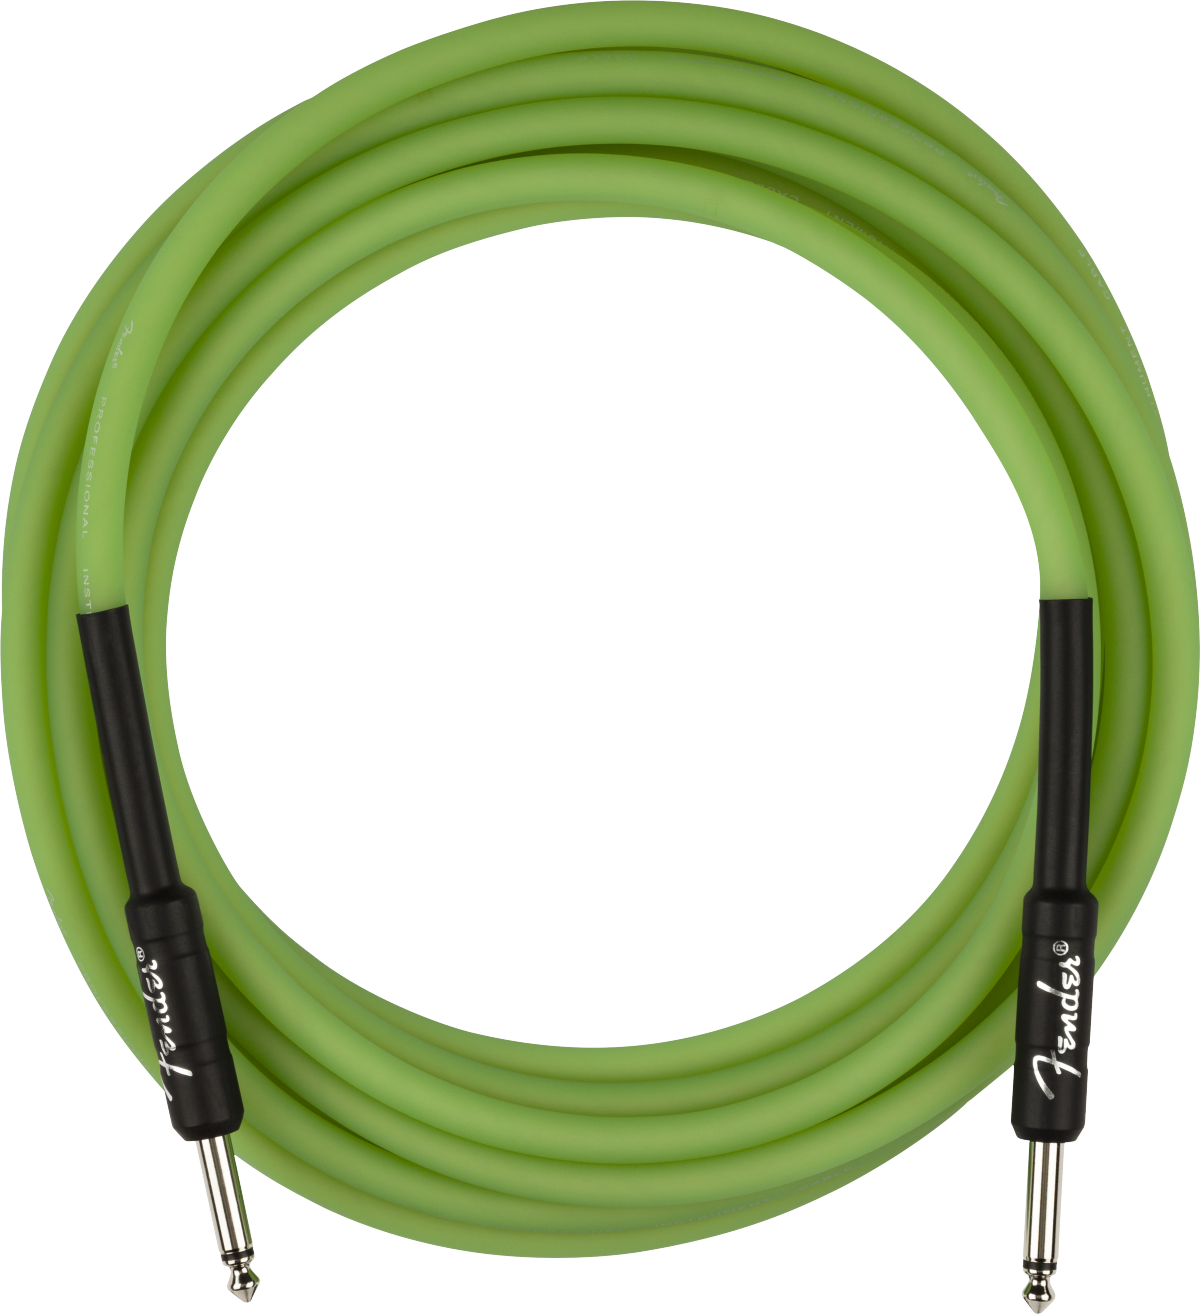 Fender Pro Glow In The Dark Instrument Cable Droit/droit 18.6ft Green - Cable - Main picture